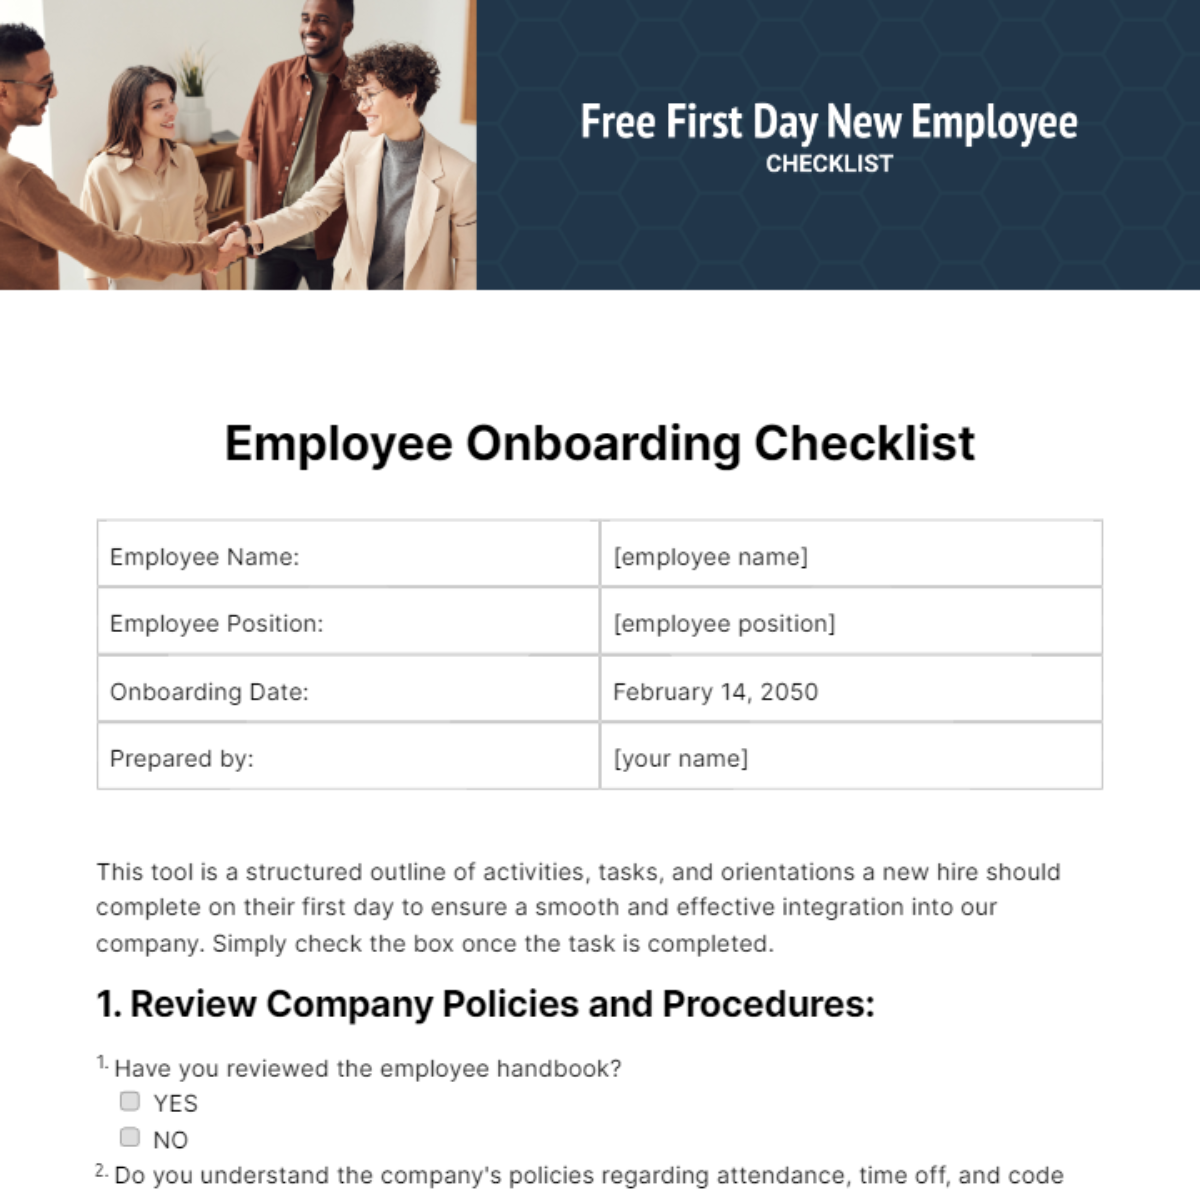 Frist Day New Employee Checklist Template